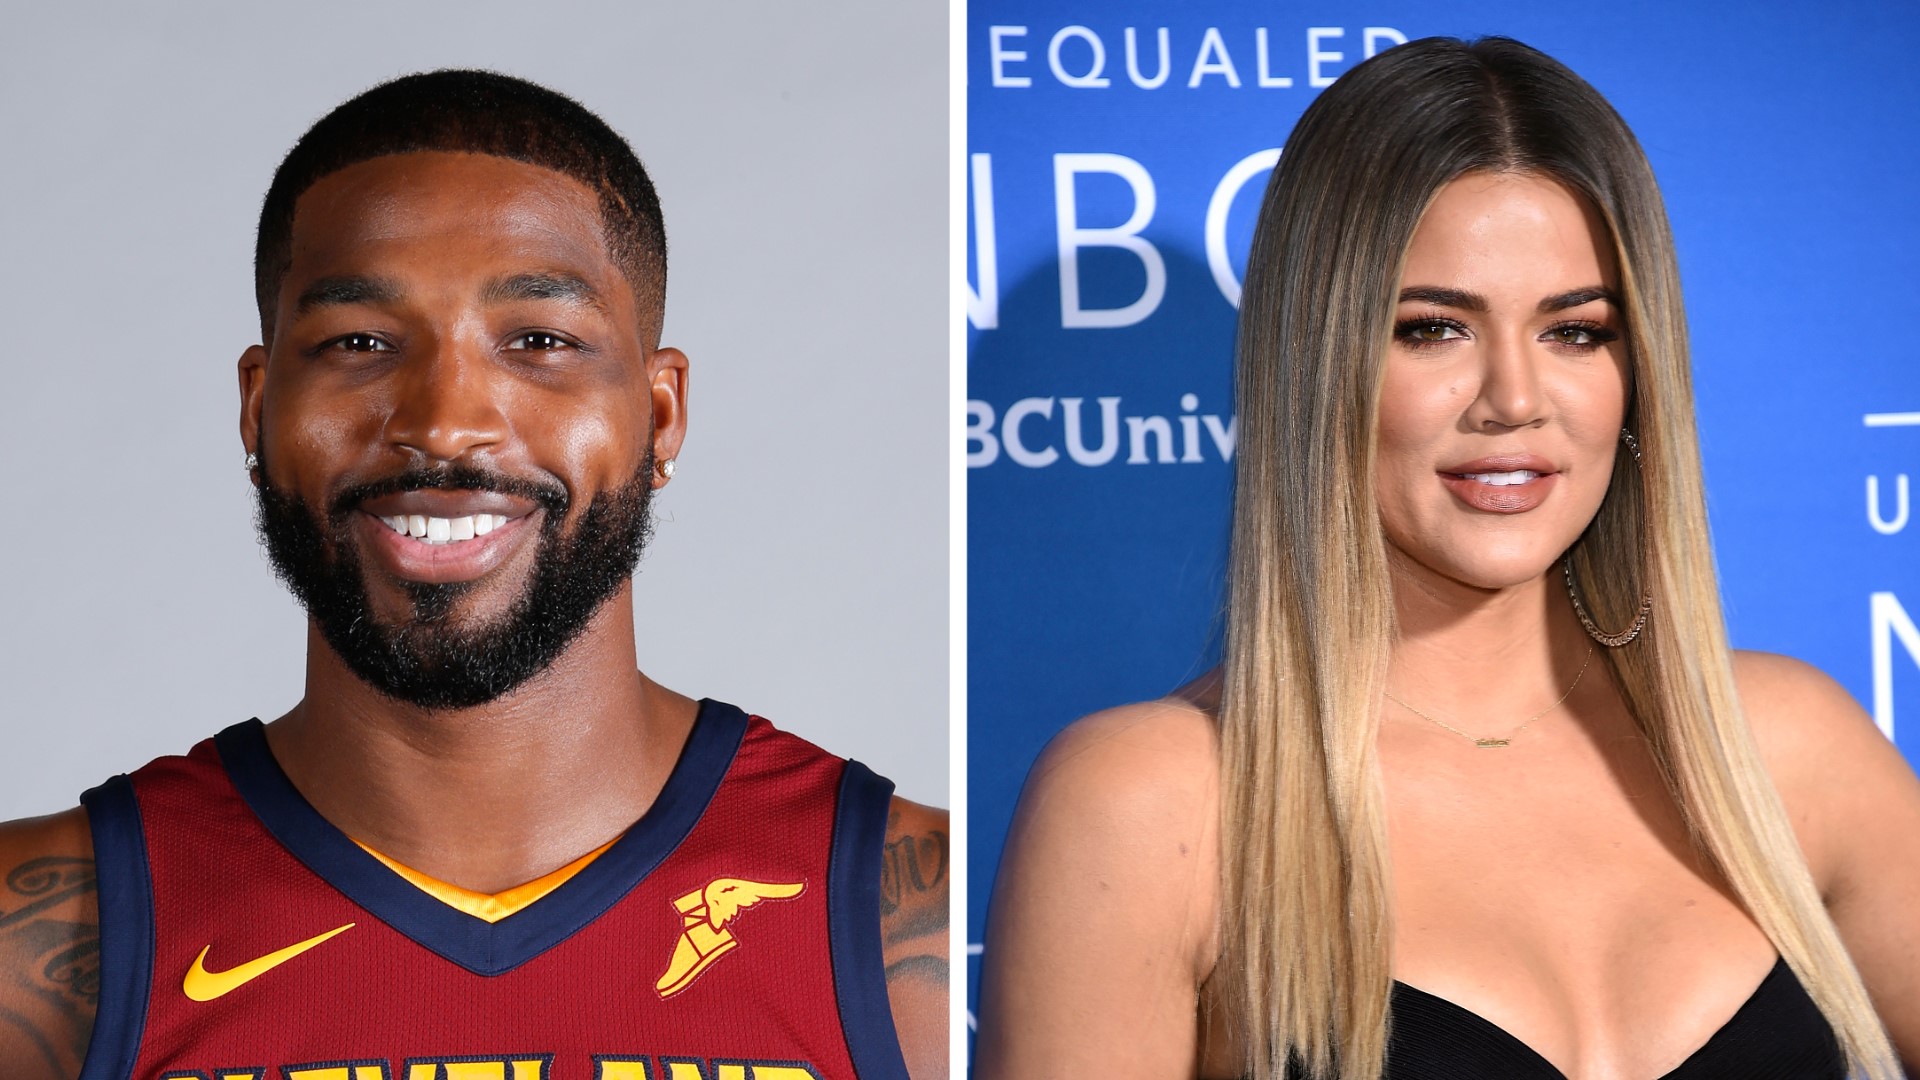 Khloe Kardashian dumped boyfriend Tristan Thompson for allegedly cheating on her with Kylie Jenner's best friend. Plus, Burberry is apologizing after one of its models sported a hoodie with a cord knotted in the shape of a noose.